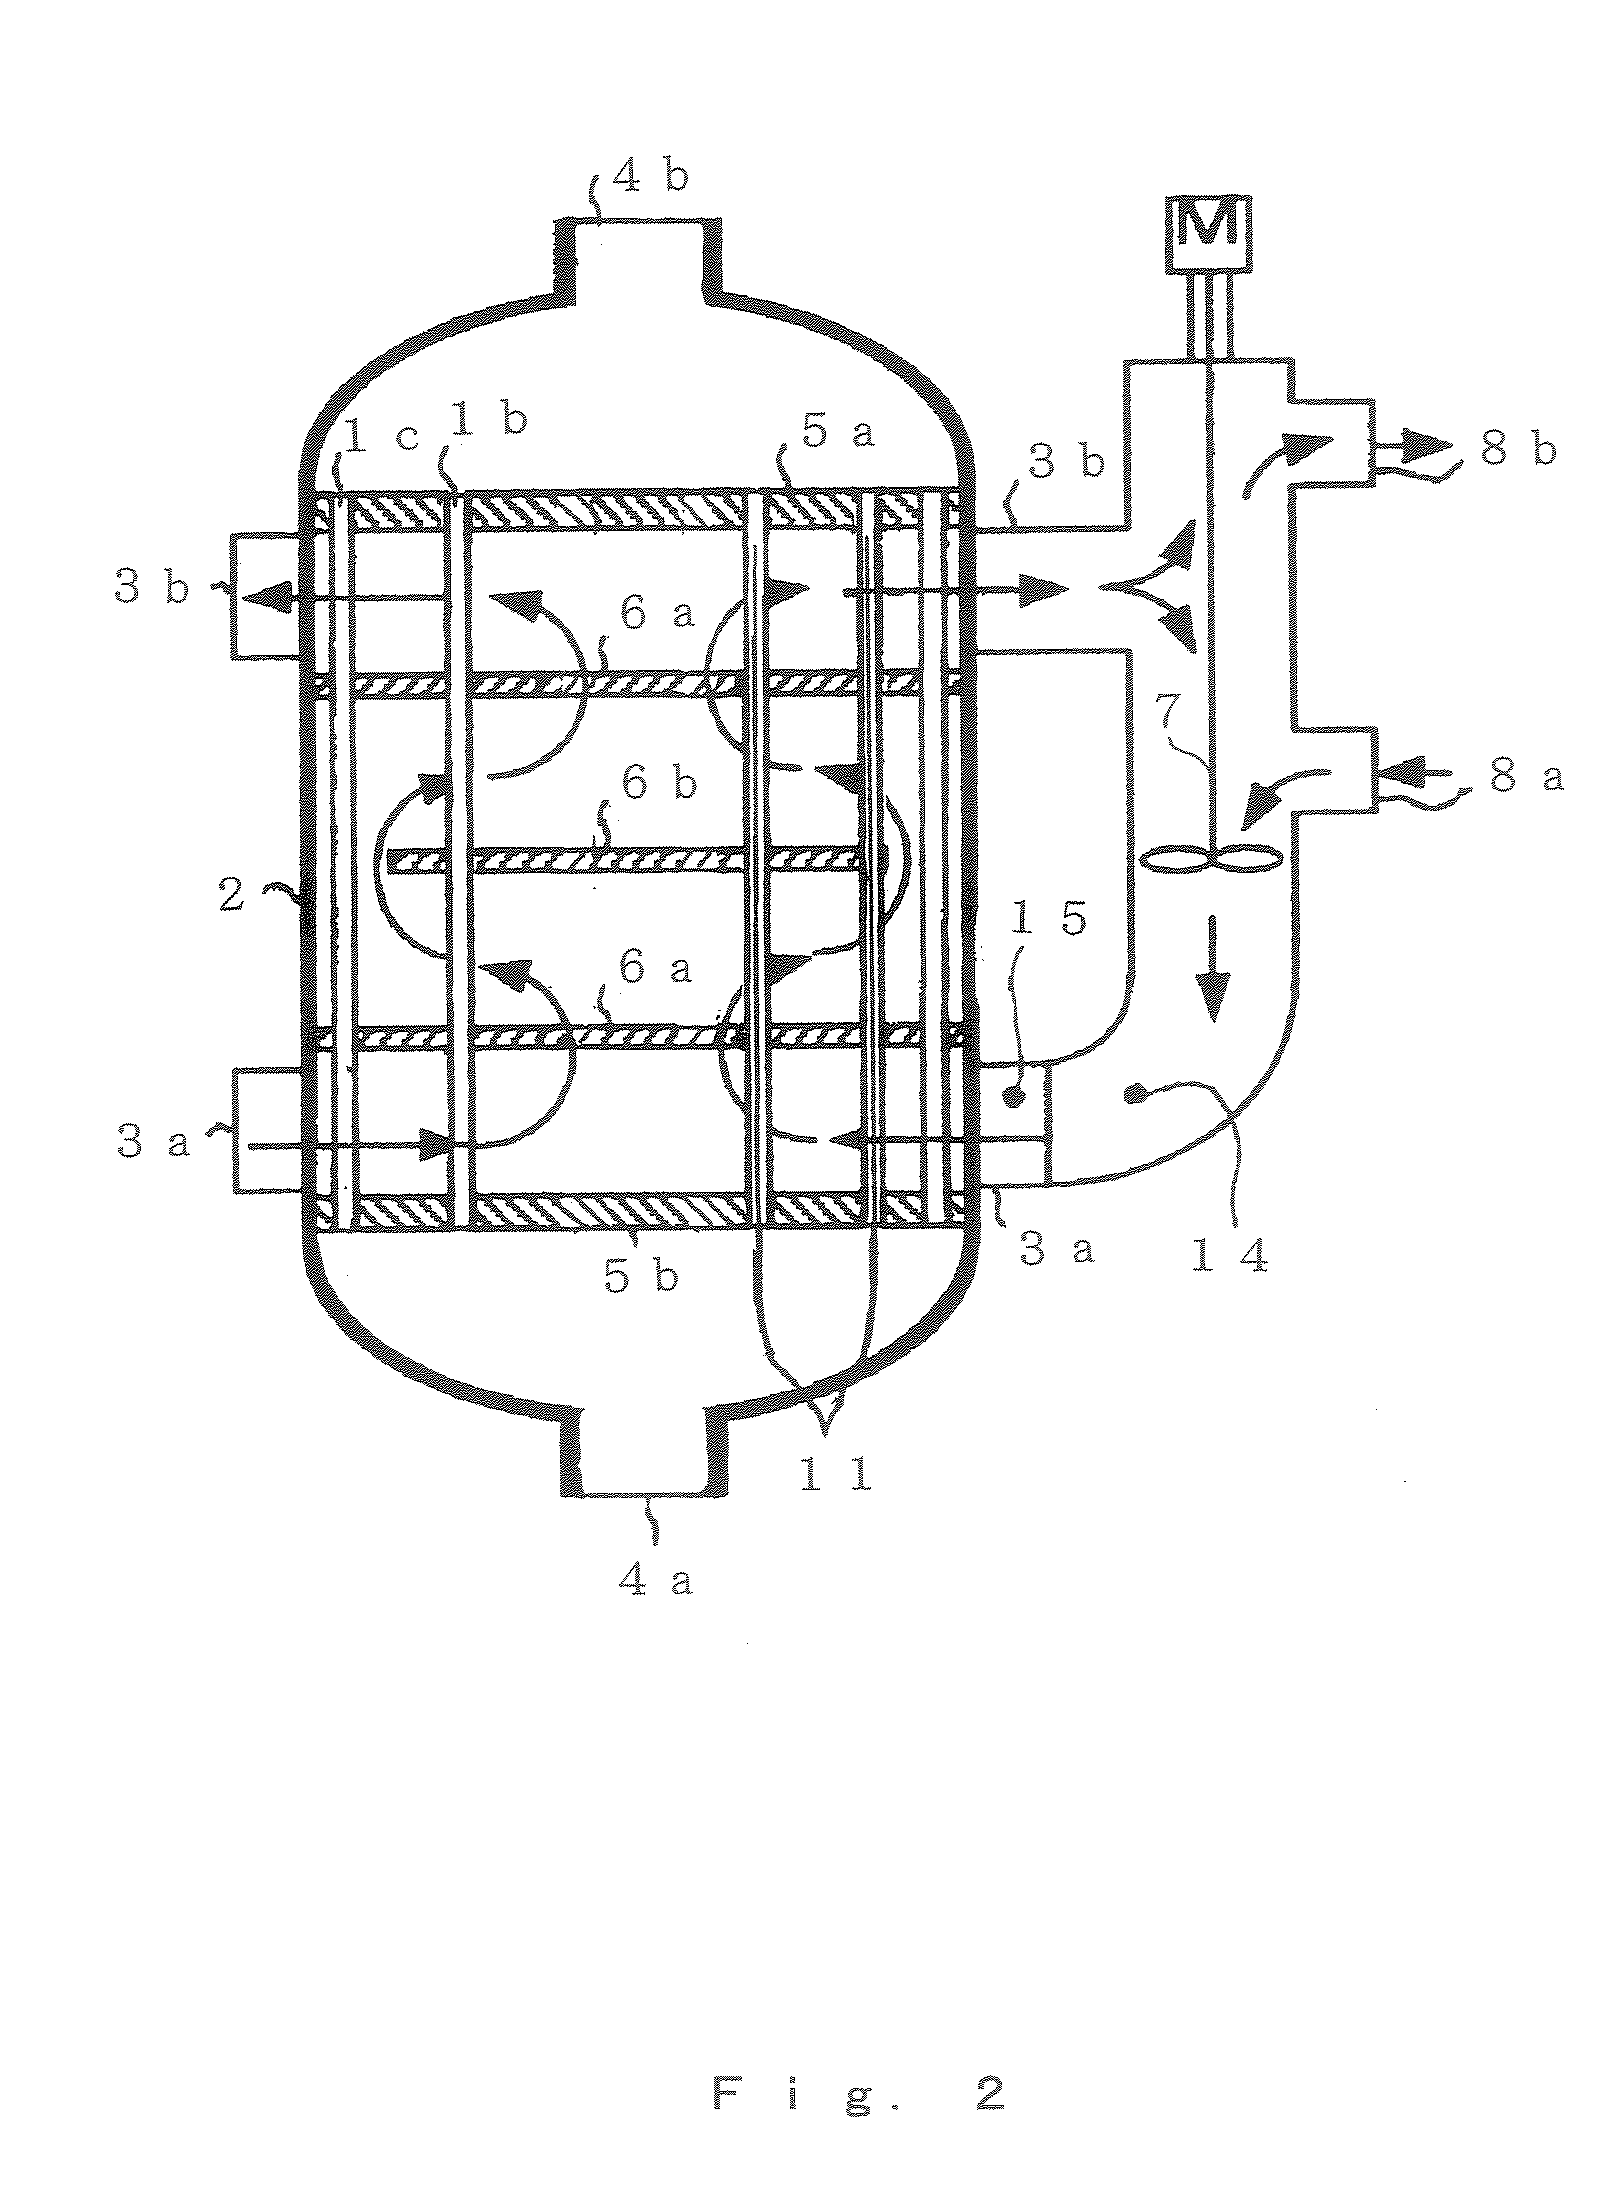 Apparatus For (Meth) Acrylic Acid Production And Process For Producing (Meth) Acrylic Acid